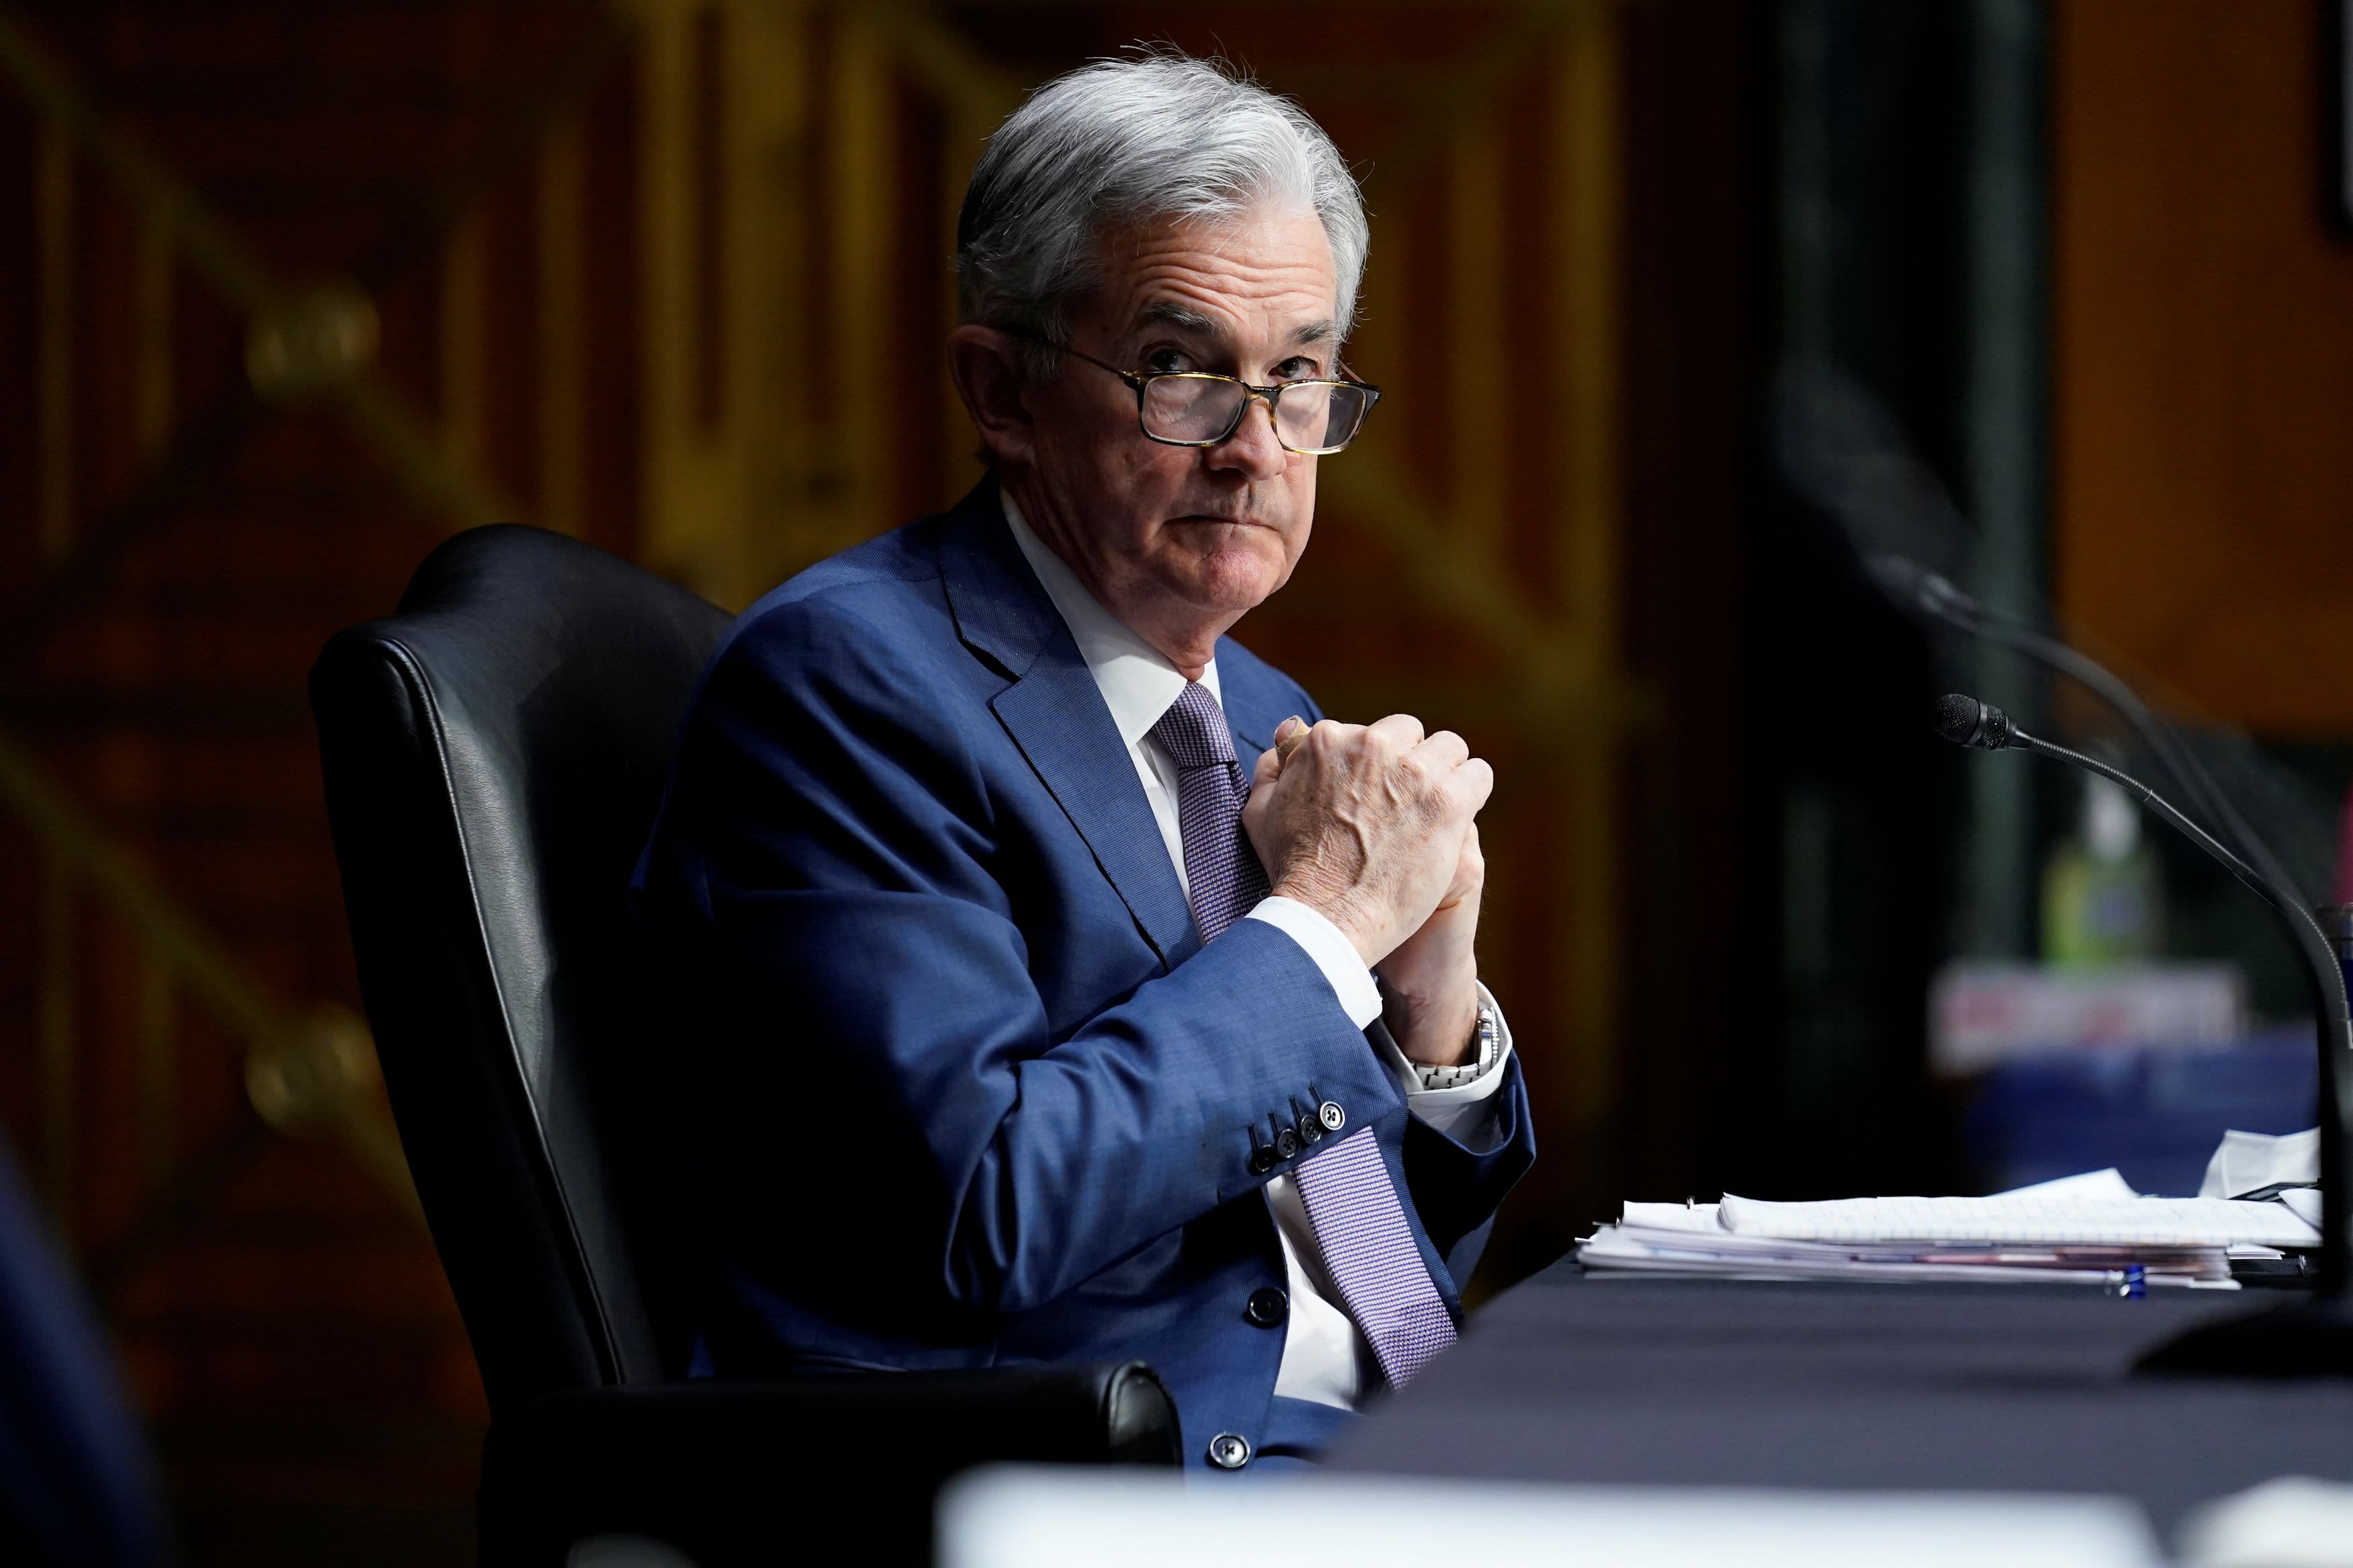 The Fed could be a source of volatility as Powell speaks next week